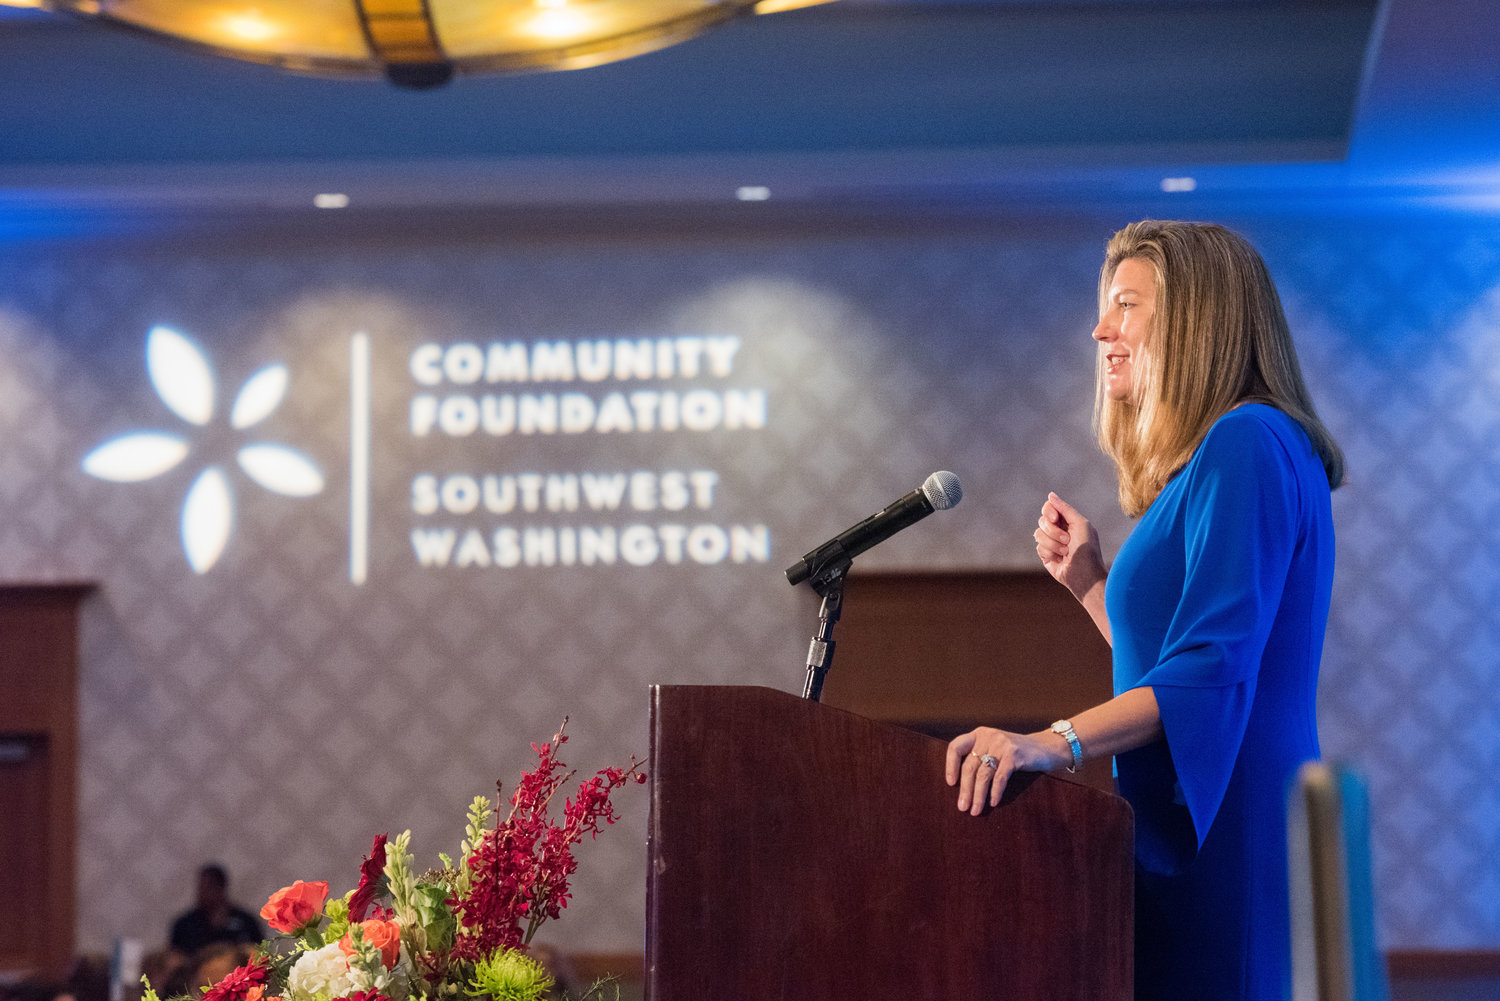 Community Foundation for Southwest Washington President Jennifer Rhoads provides an update on the foundation during the organization’s 2019 annual luncheon.